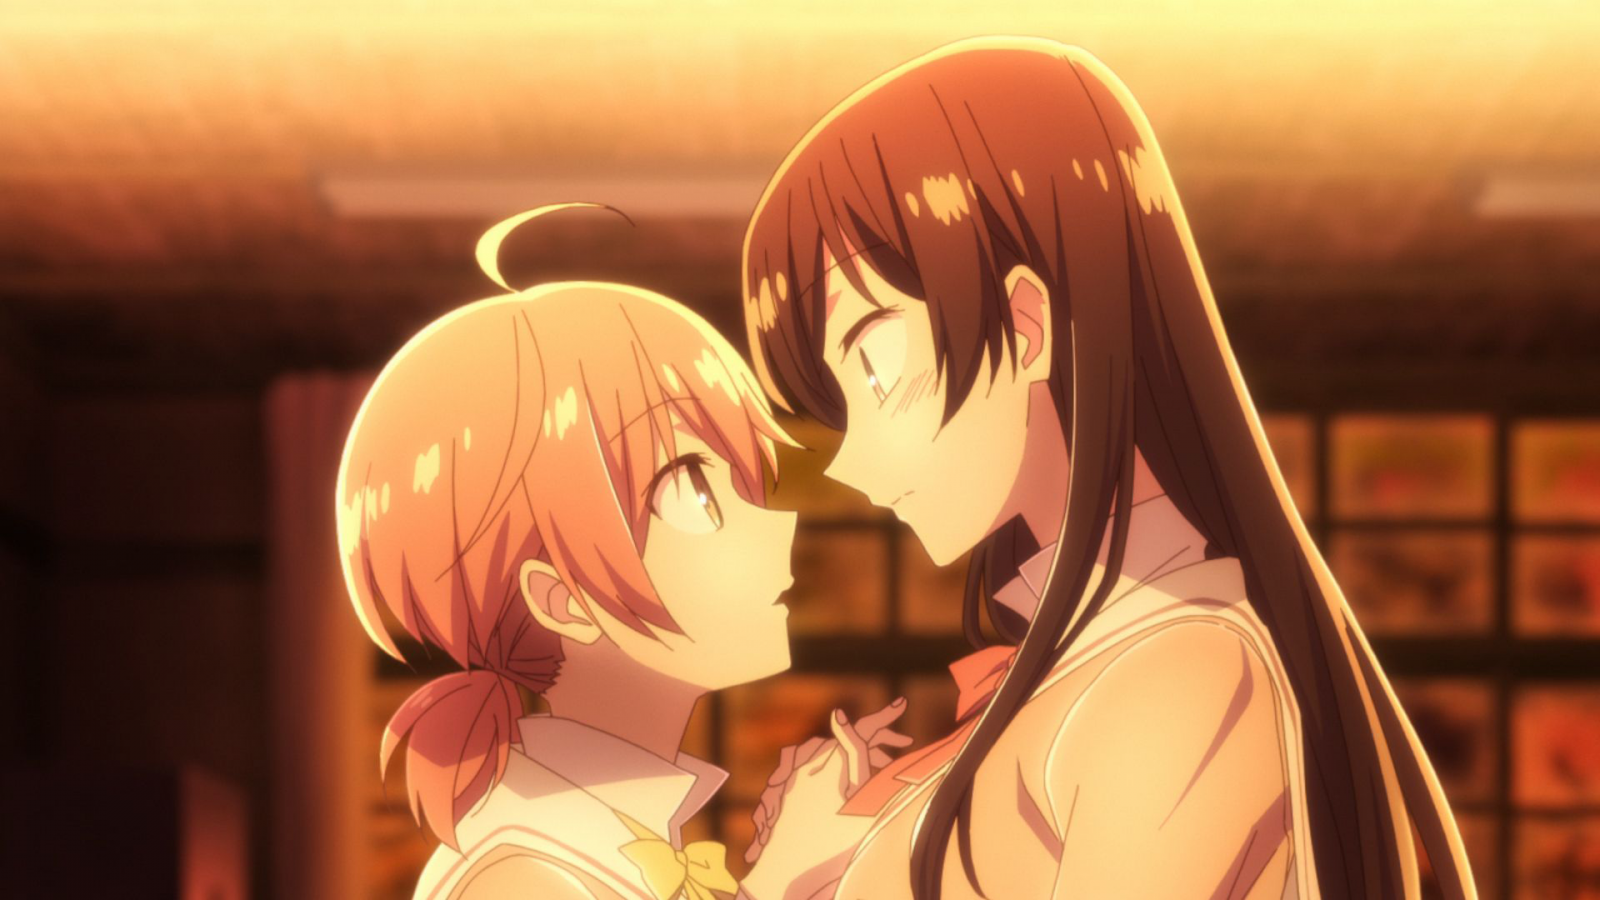 Bloom Into You - Volume 1: Episode 01-04 Blu-ray Image 8